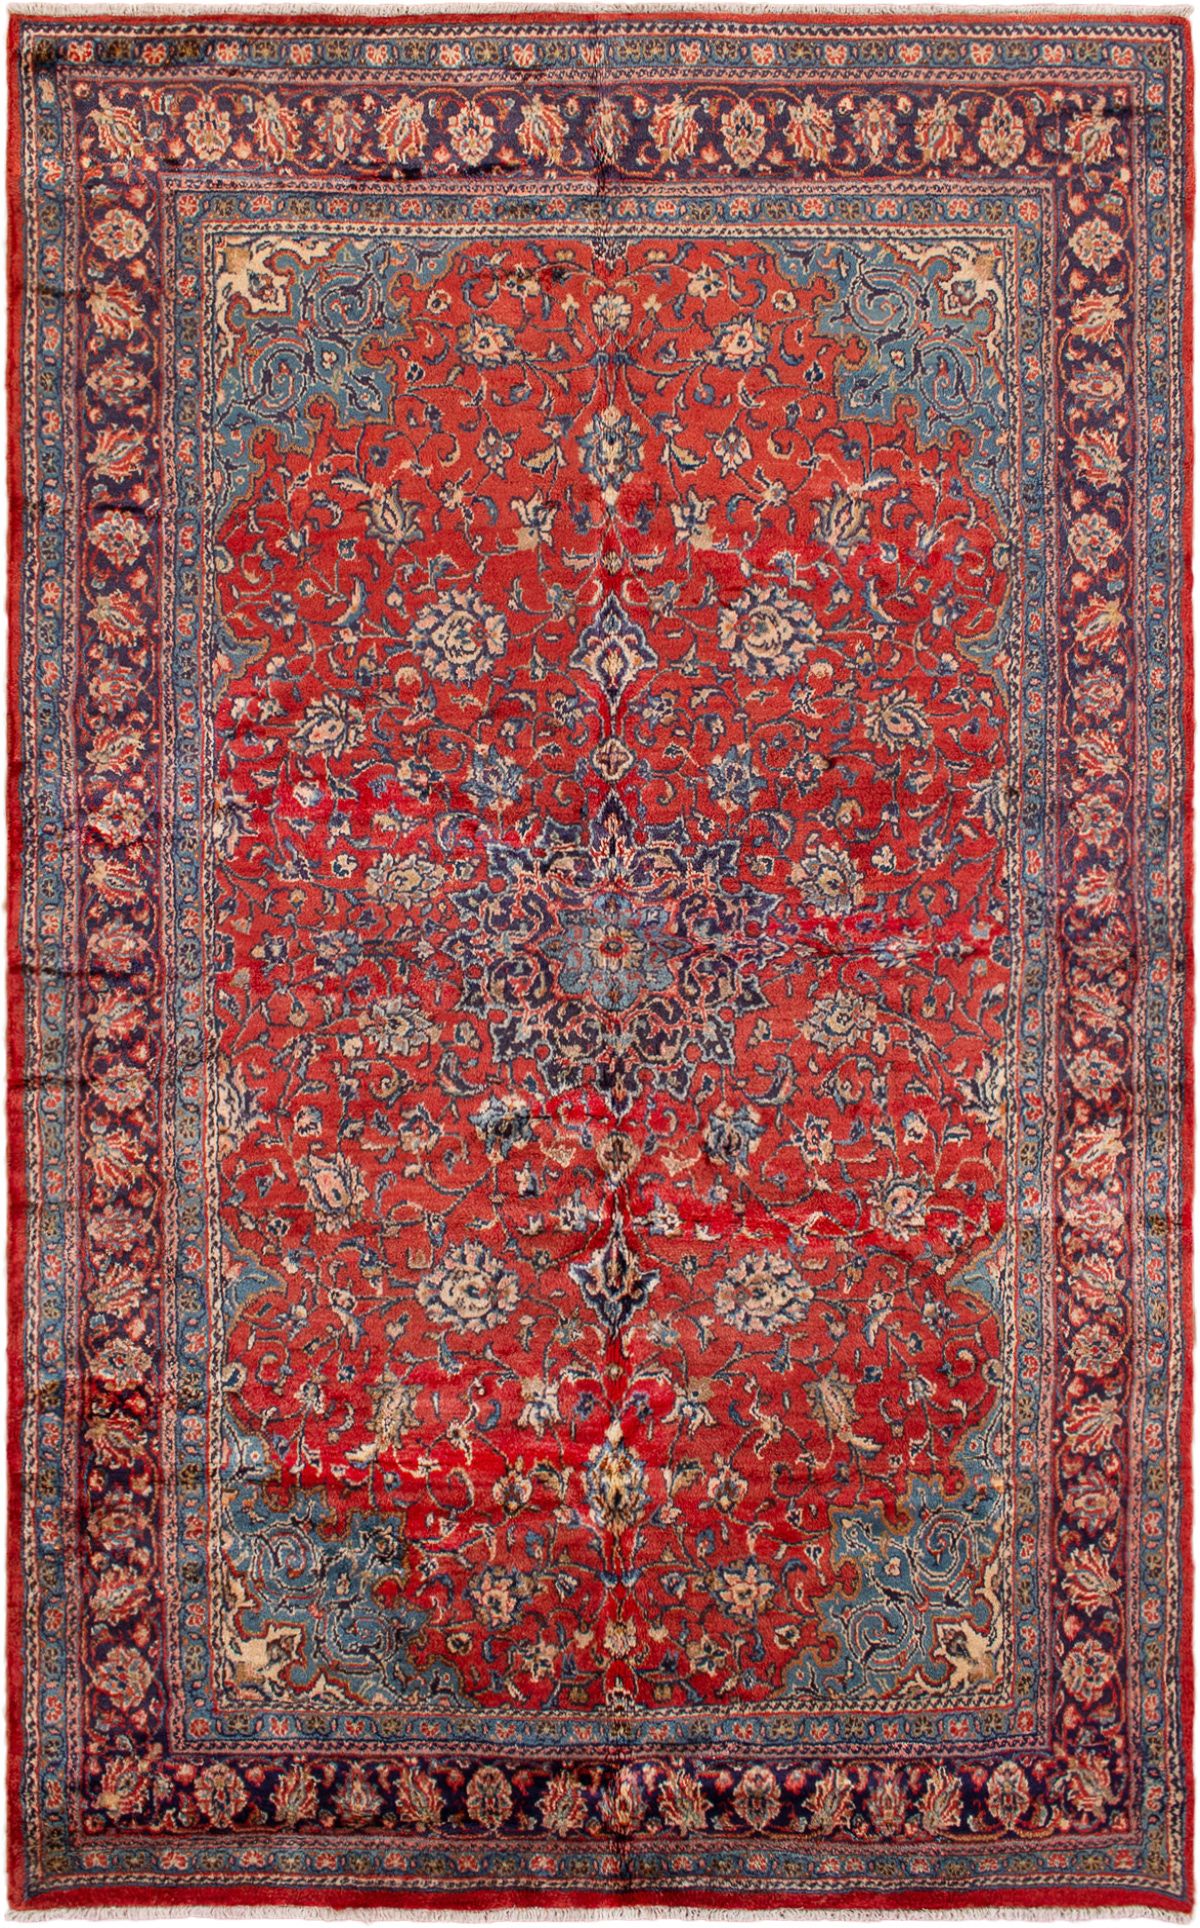 Hand-knotted Mahal Red Wool Rug 6'6" x 10'9" Size: 6'6" x 10'9"  